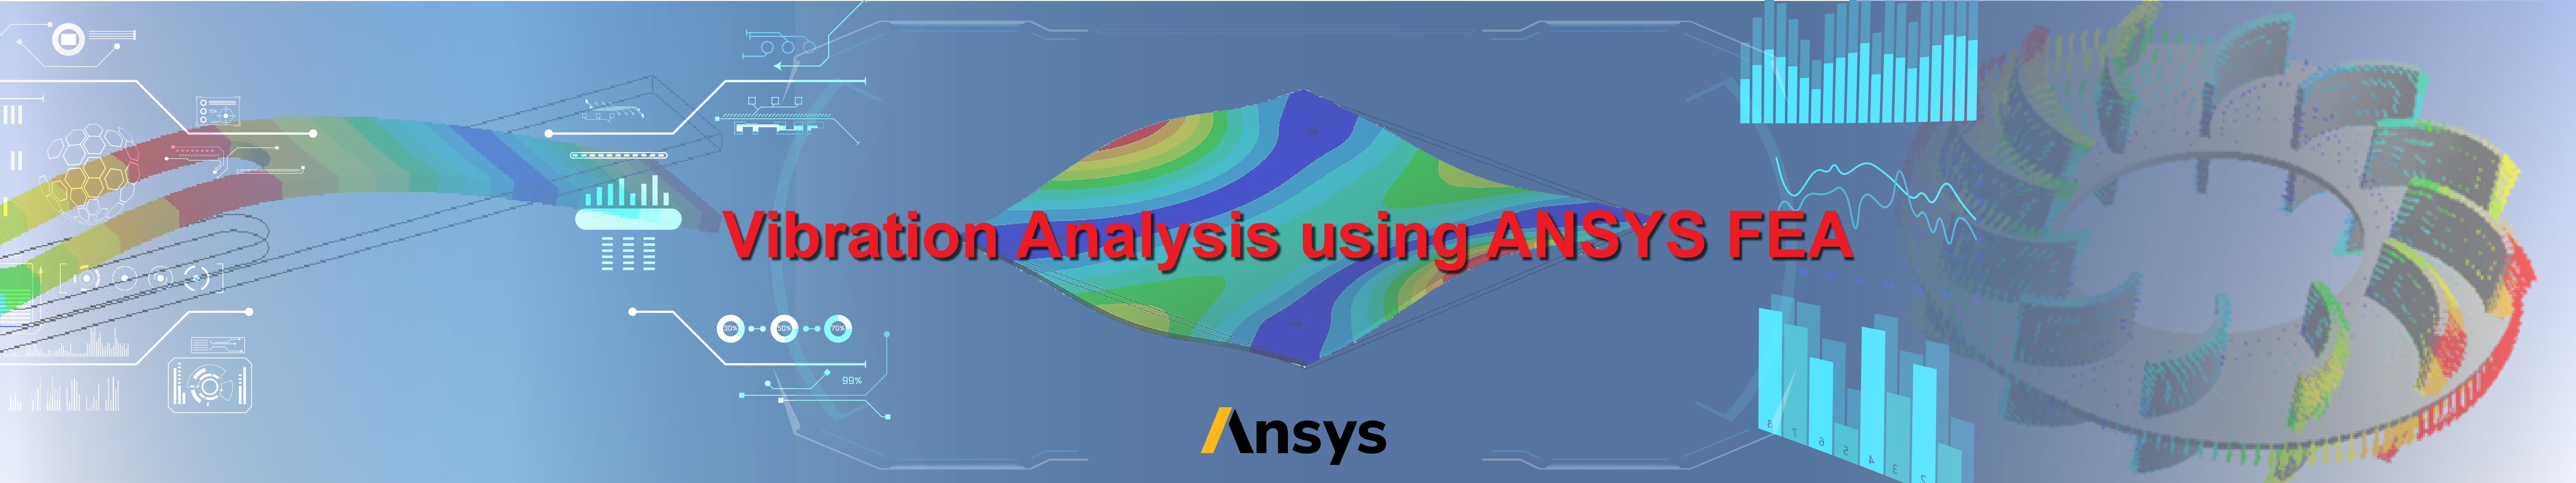 Vibration Analysis using ANSYS FEA and Vibration Measurement for Engineering Applications